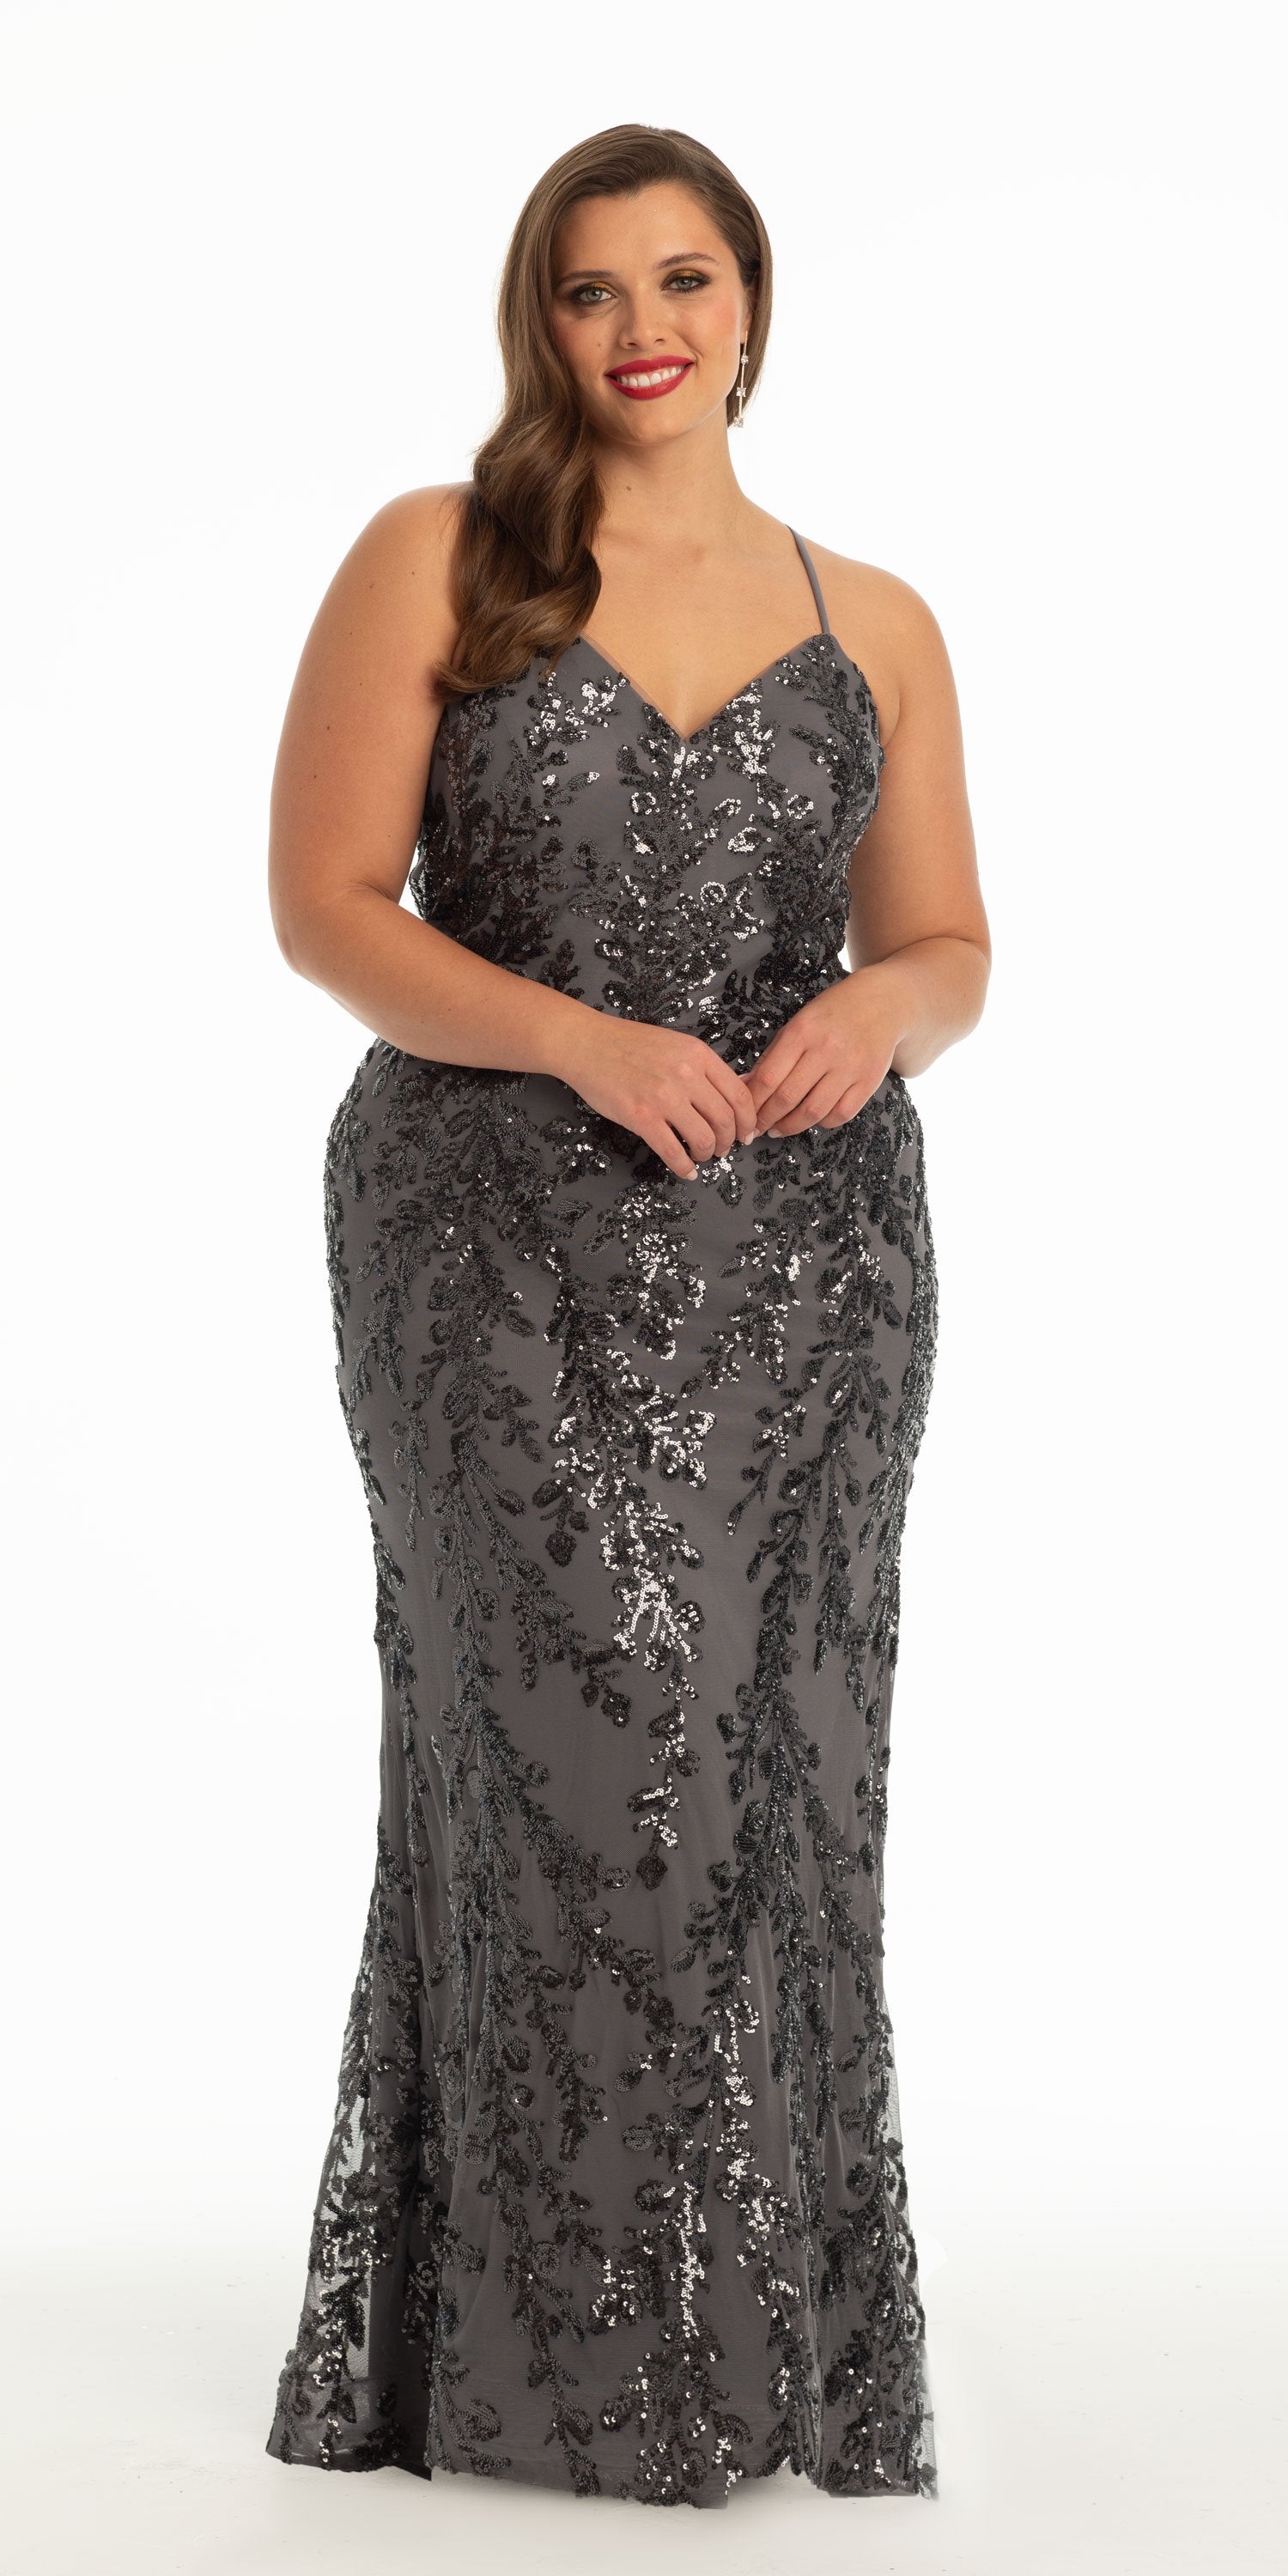 Shop dresses for Prom, Homecoming, Evening, Wedding, and more at Camil –  Camille La Vie